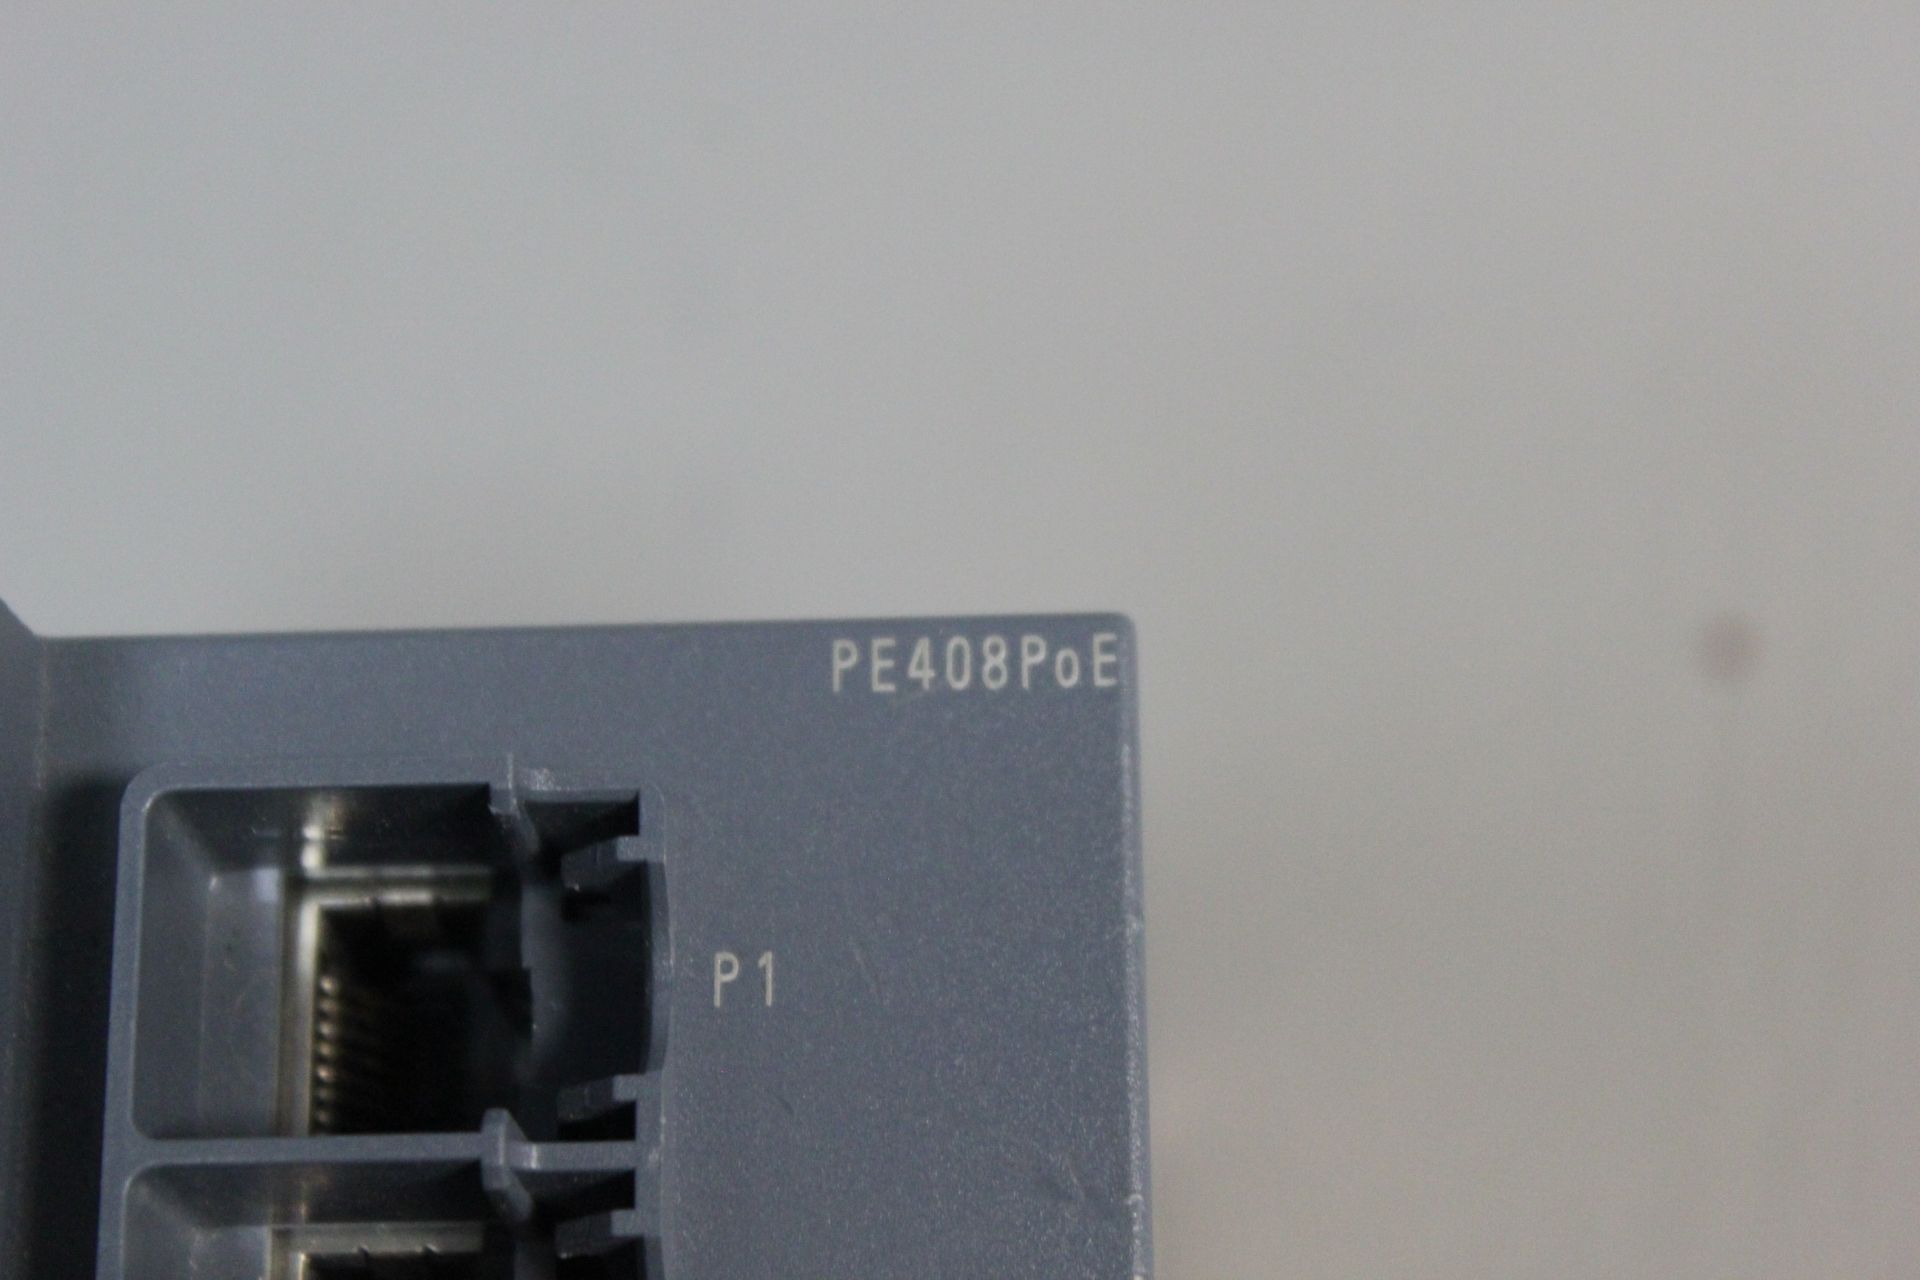 SIEMENS SCALANCE PE408POE INDUSTRIAL ETHERNET SWITCH - Image 3 of 6